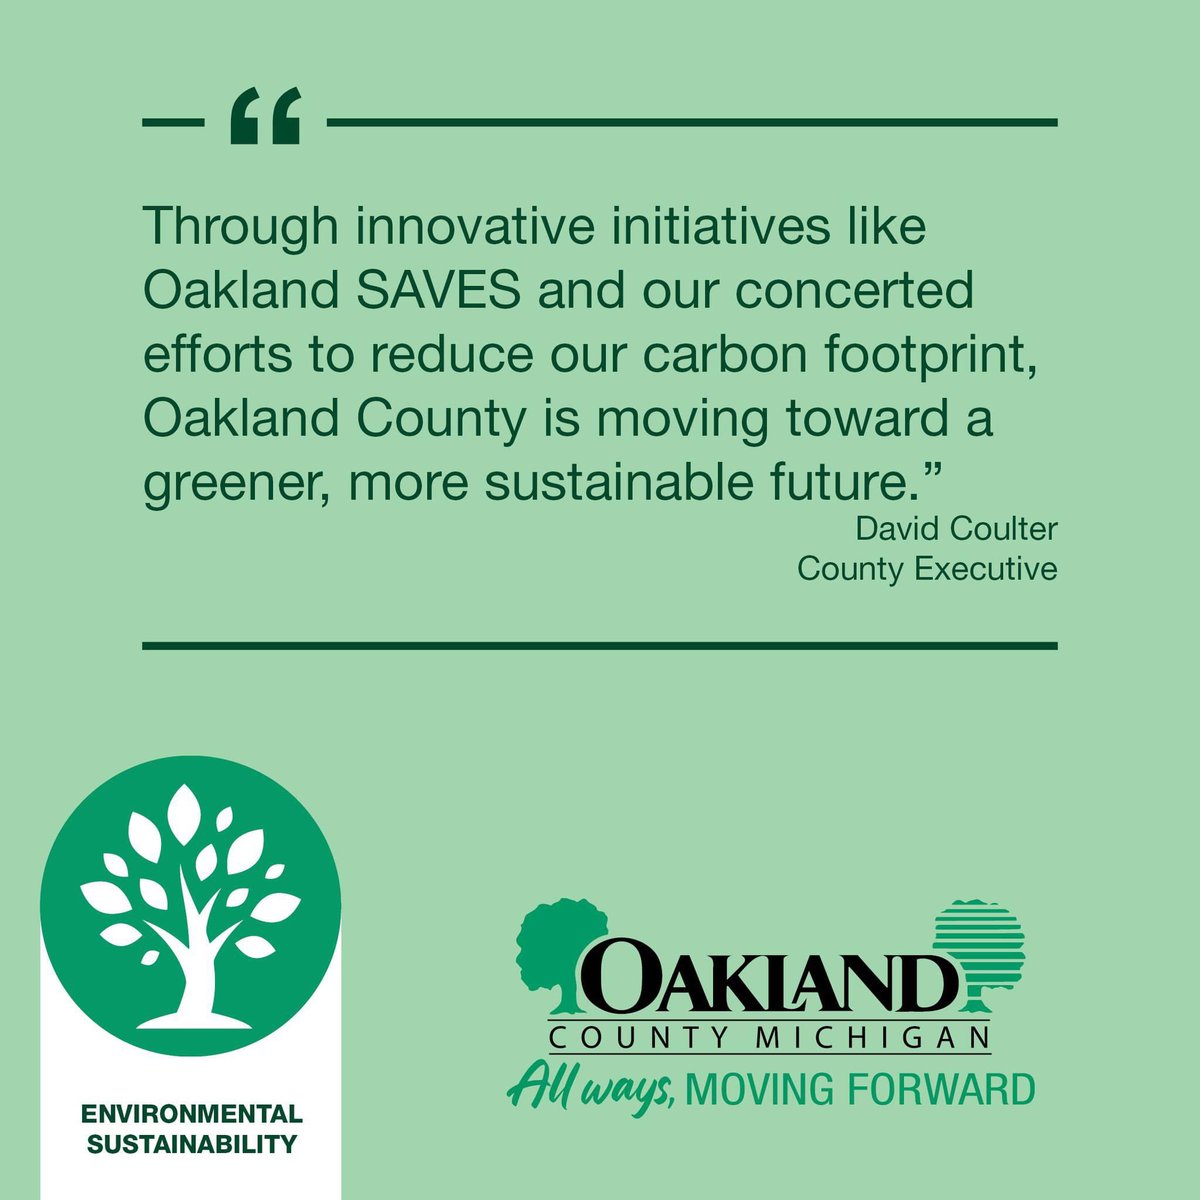 NEWS RELEASE: Oakland County Rises from Silver to Gold in Environmental Leadership

Read #OaklandCounty release: tinyurl.com/72972ddw.